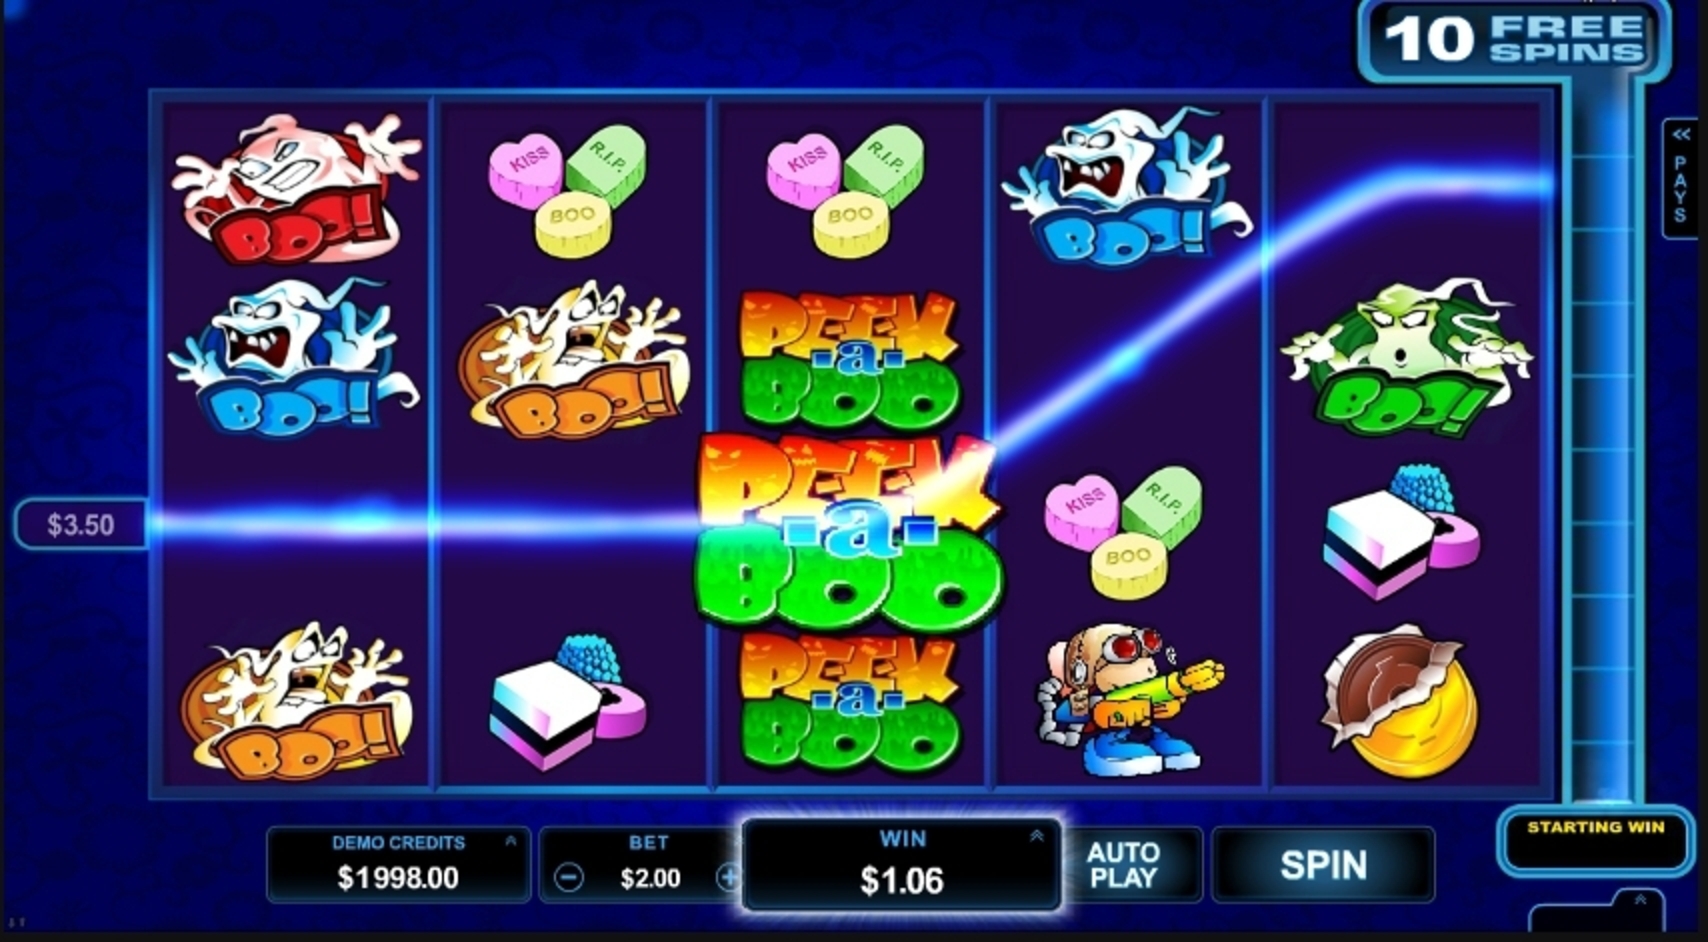 Win Money in Peek-a-Boo Free Slot Game by Microgaming